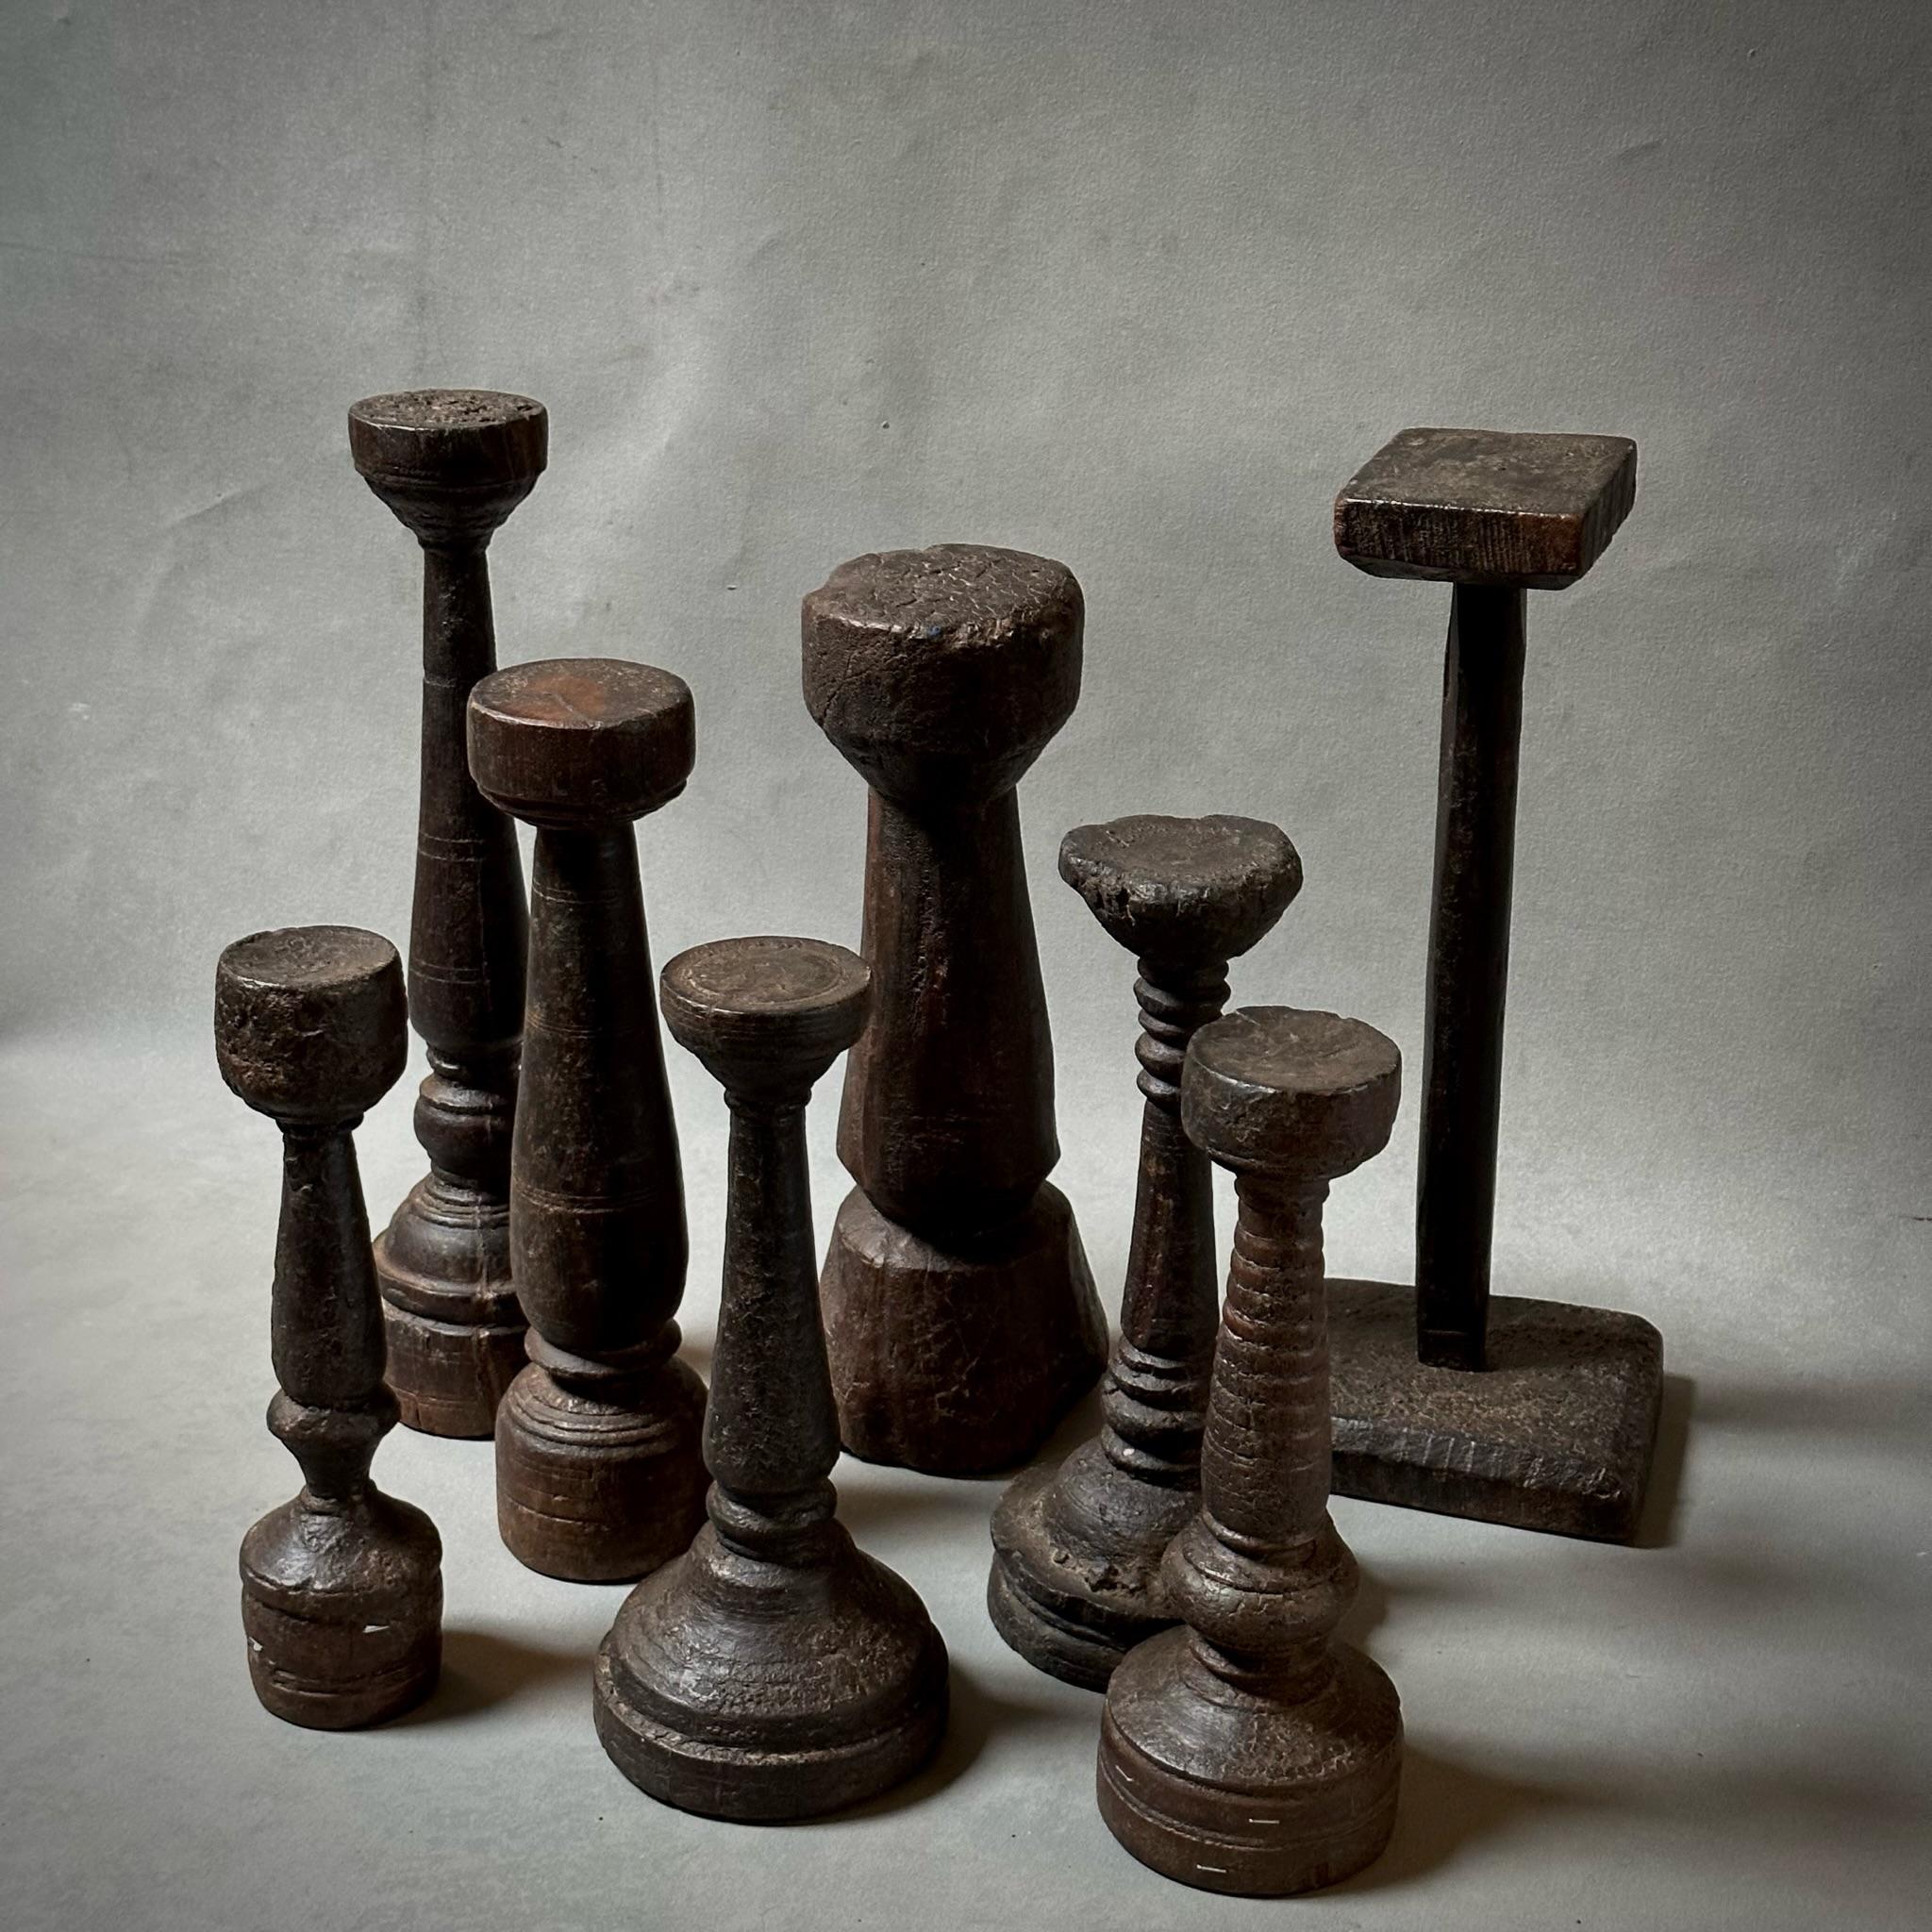 Set of eight carved wooden objects from West Africa. Earthy and elegant, these would look especially great displayed as a collection. The variations in size and shape create a dramatic sense of volume and texture. 

West Africa, circa